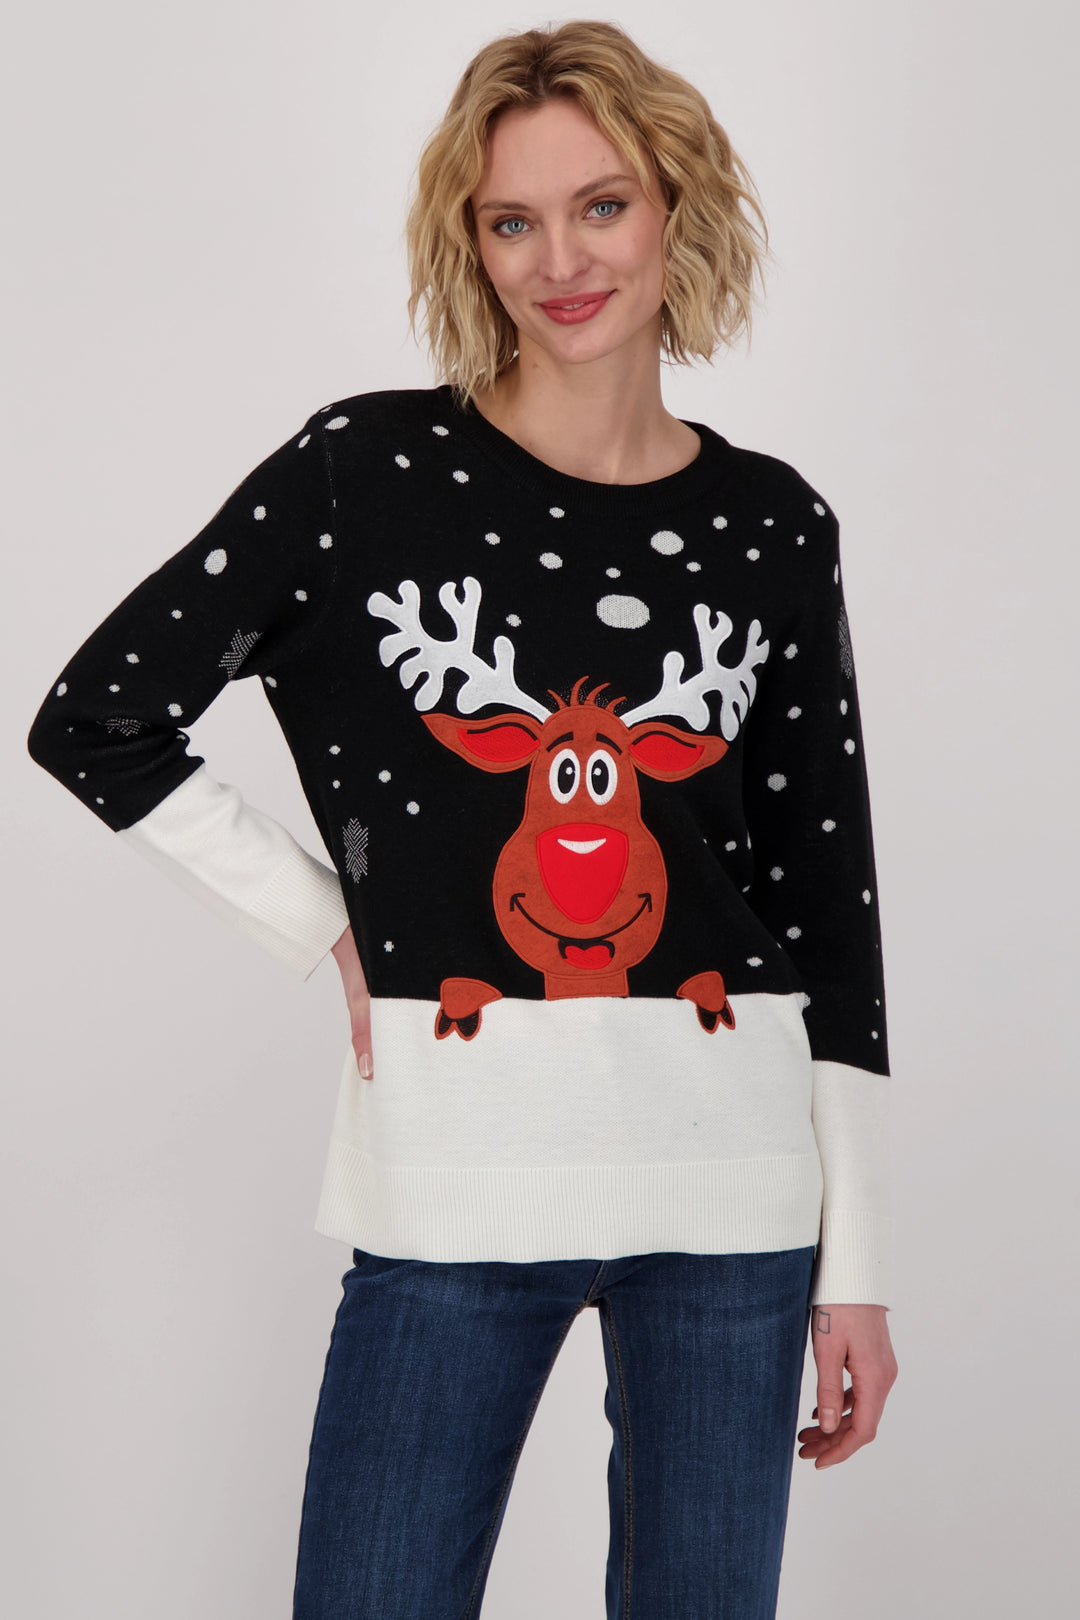 Enjoy a stylish round neckline, white snowy cuffs and hem, plus the cute and friendly Rudolph on the front and back!